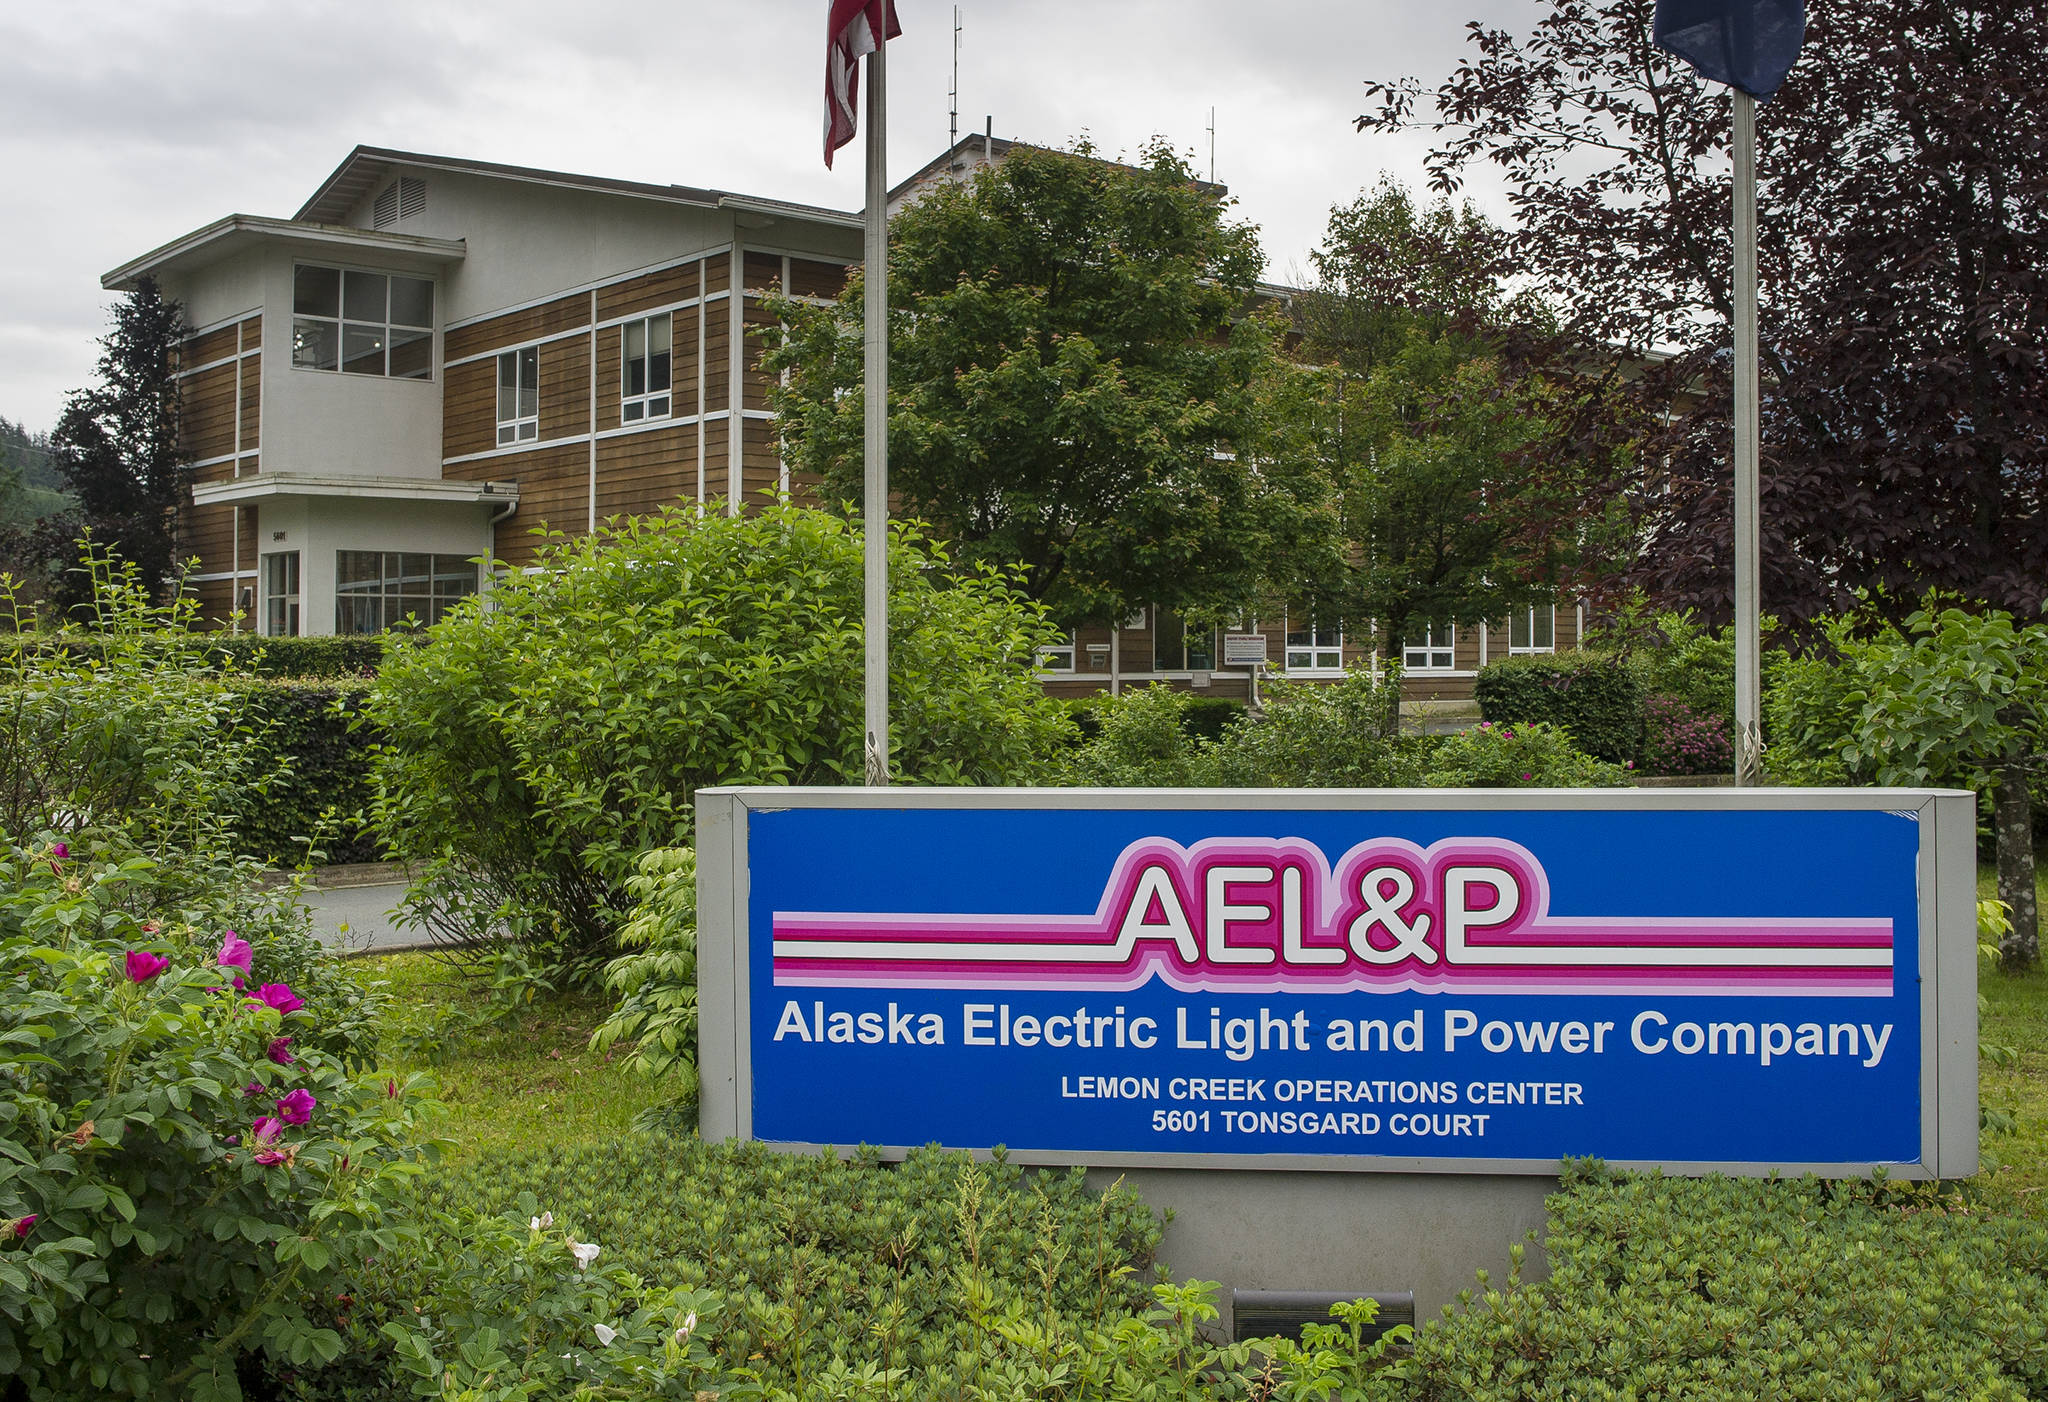 Alaska Electric Light and Power Company Lemon Creek operations center in Juneau on Wednesday, July 19, 2017. AEL&P’s parent company Avista is in the process of being sold, and some Juneauites are looking to have AEL&P run locally again. (Michael Penn | Juneau Empire)